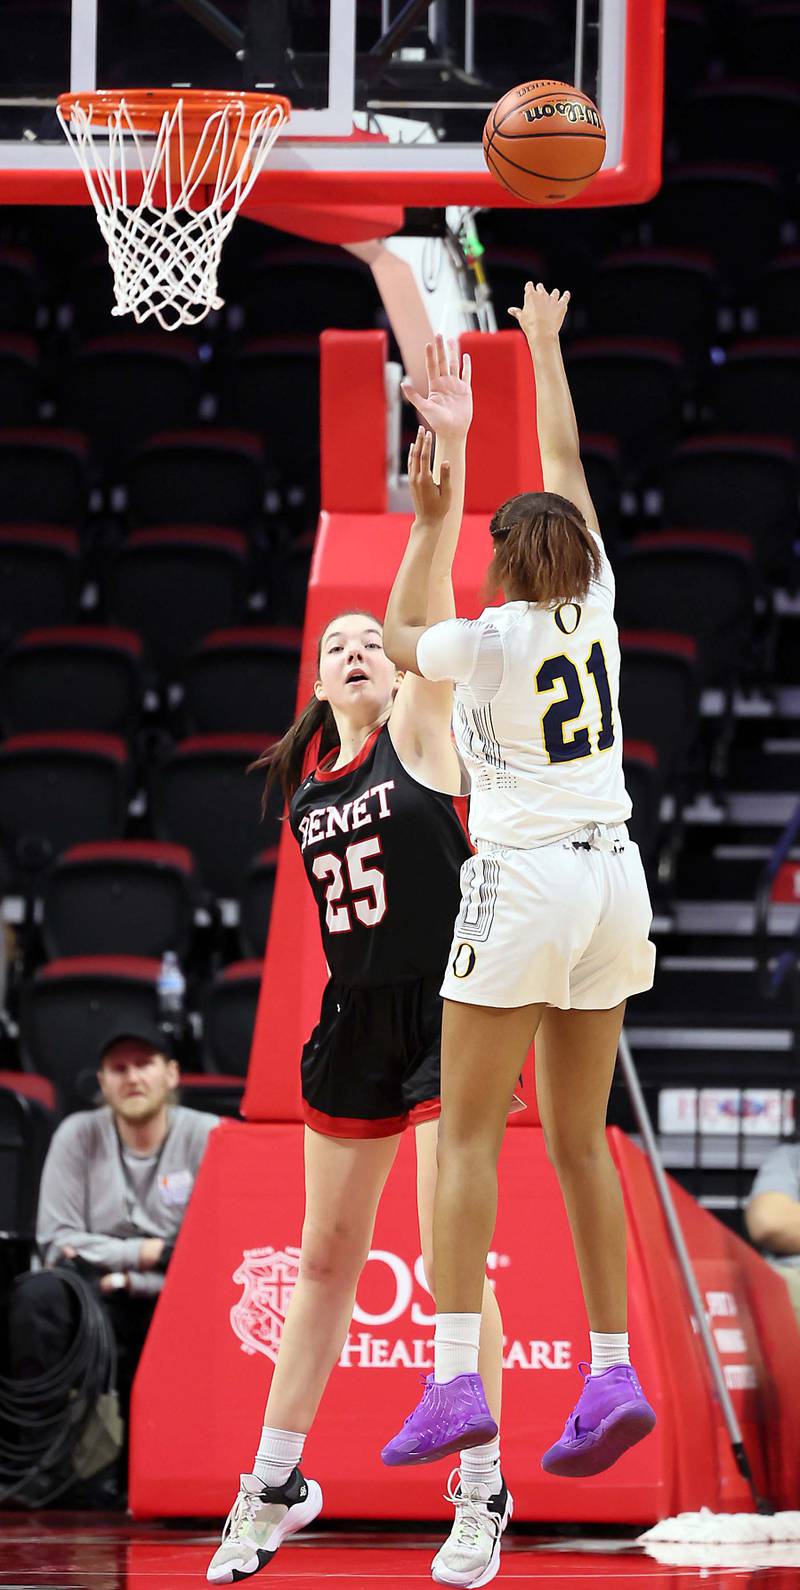 Benet Academy's Samantha Trimberger (25) tries to block a shot by O'Fallon's Shannon Dowell (21) during the IHSA Class 4A girls basketball championship game at the CEFCU Arena on the campus of Illinois State University Saturday March 4, 2023 in Normal.